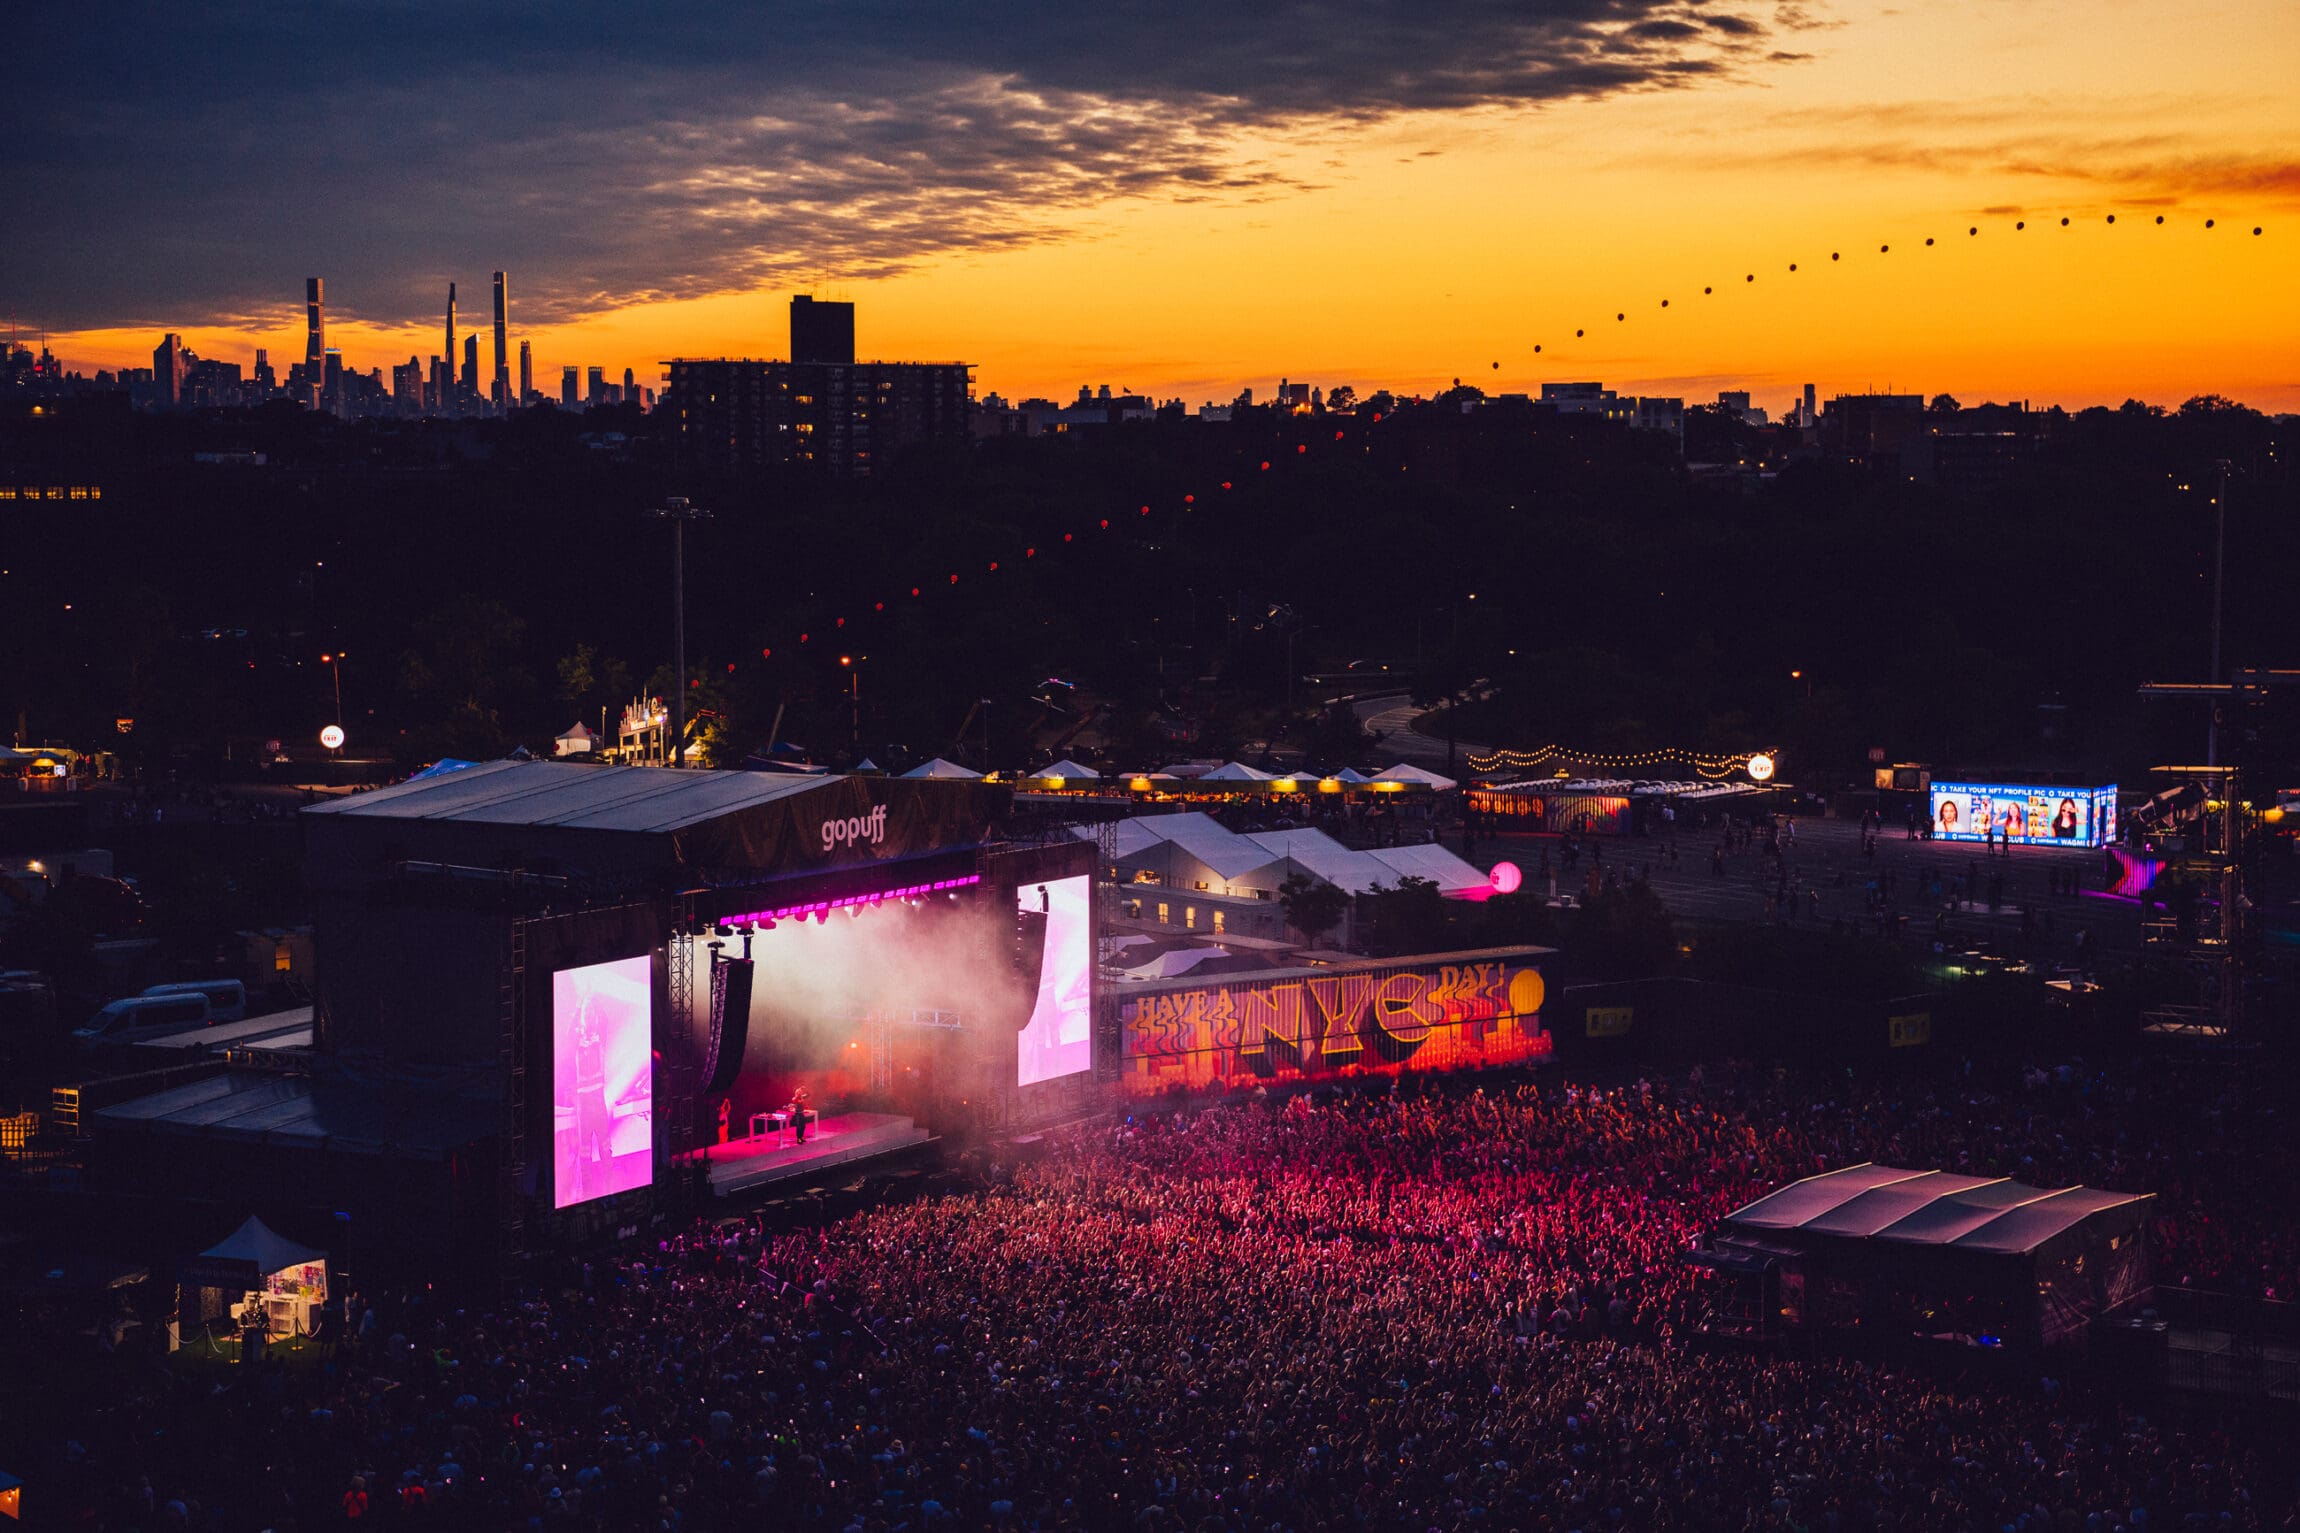 The best music festivals in the US | Flume's sunset performance at Governor's Ball 2022